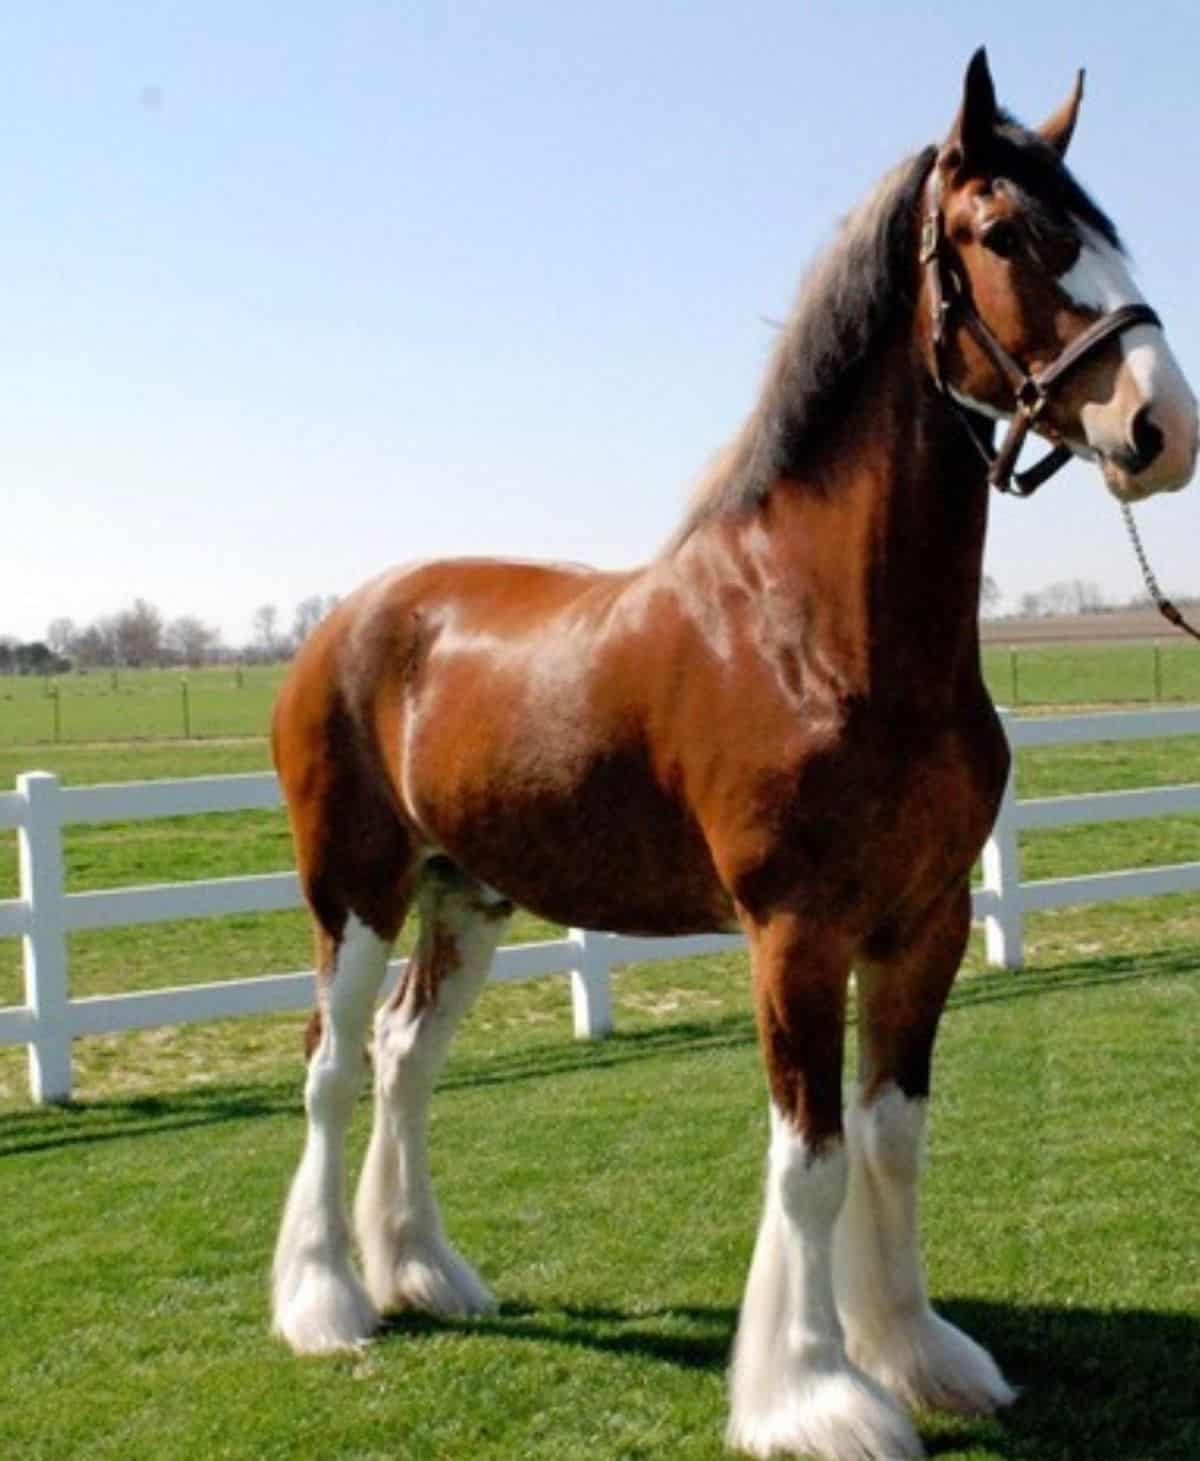 Brown Clydesdale horse with white feathered legs.